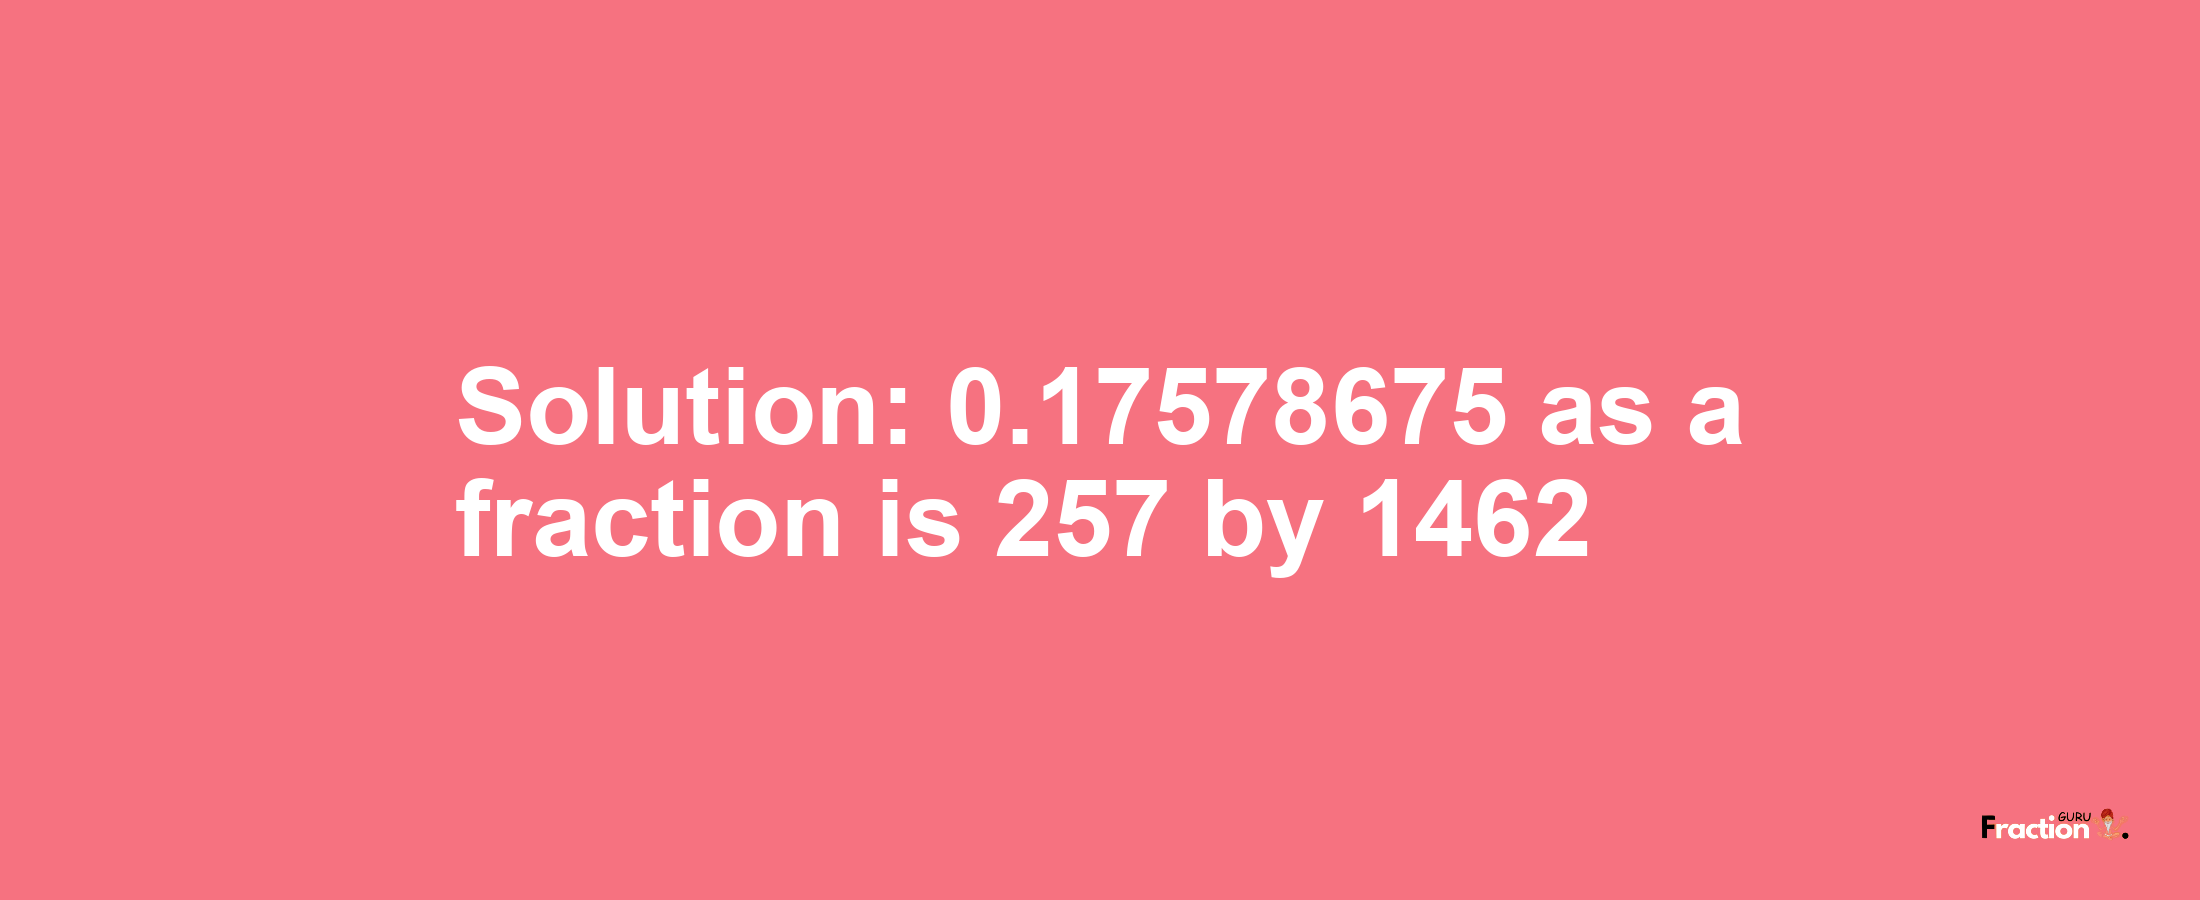 Solution:0.17578675 as a fraction is 257/1462